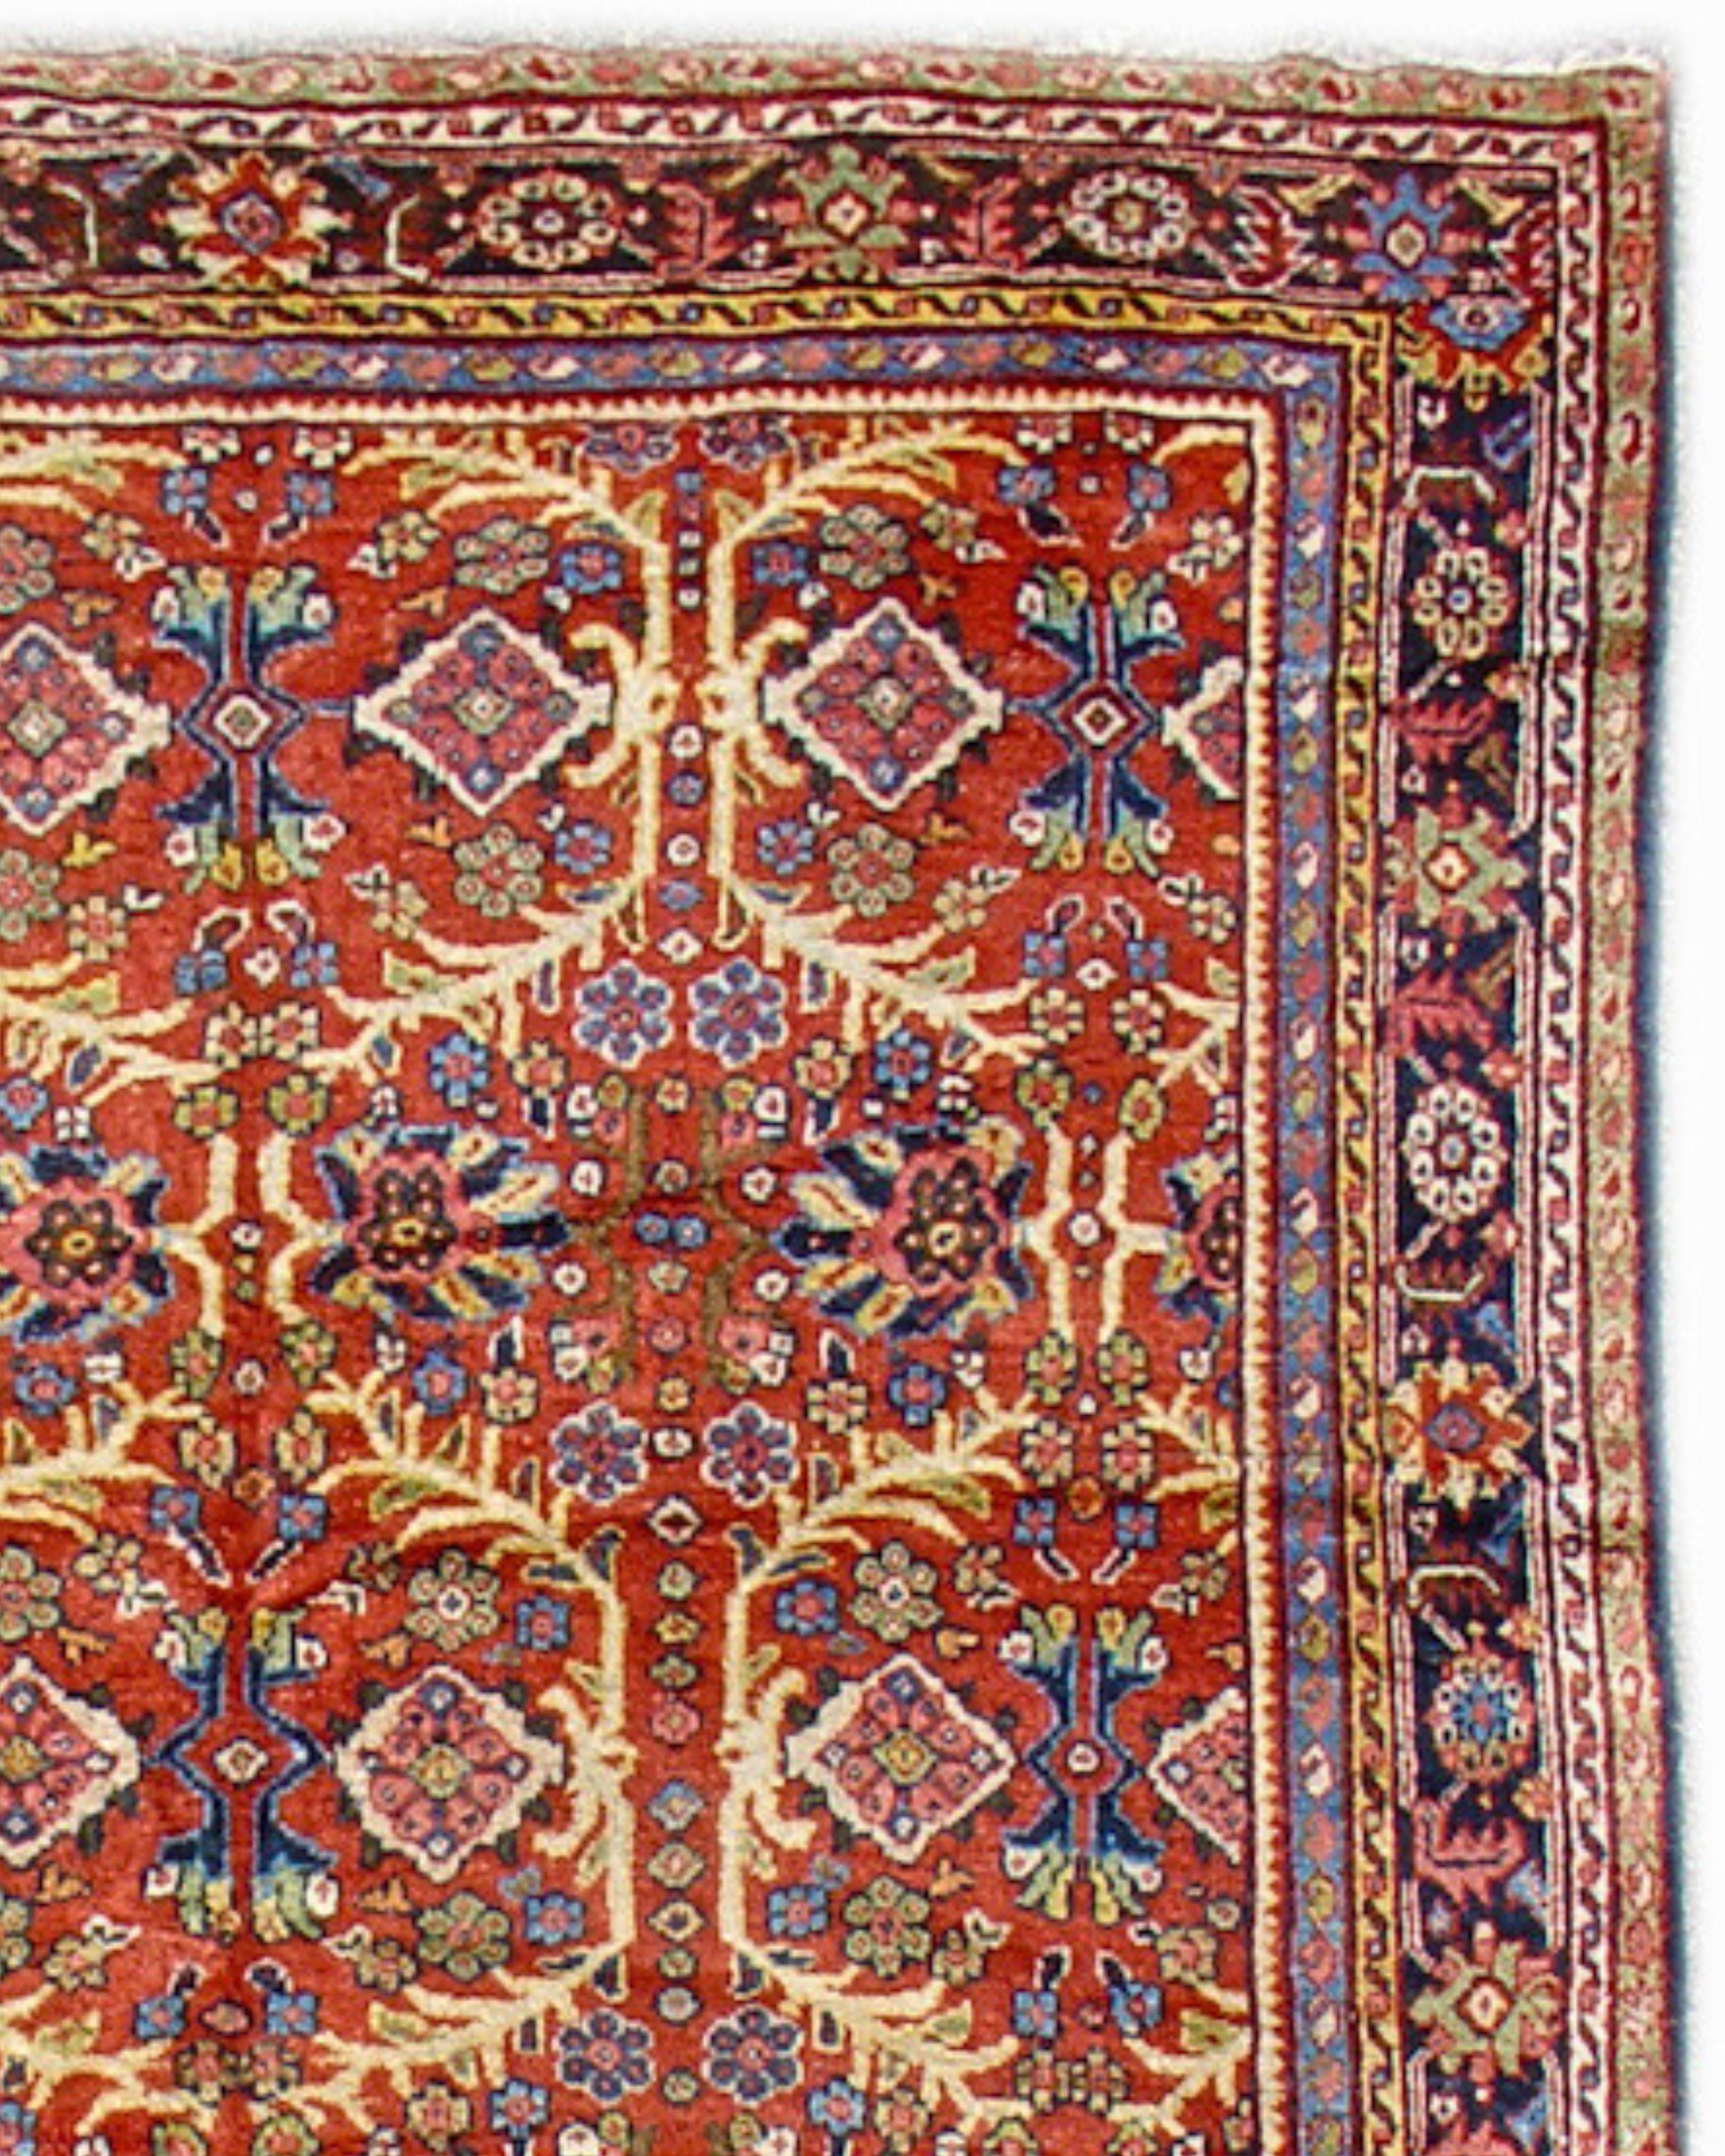 Antique Persian Mahal Rug, 19th Century

Excellent condition.

Additional information:
Dimensions: 8'6